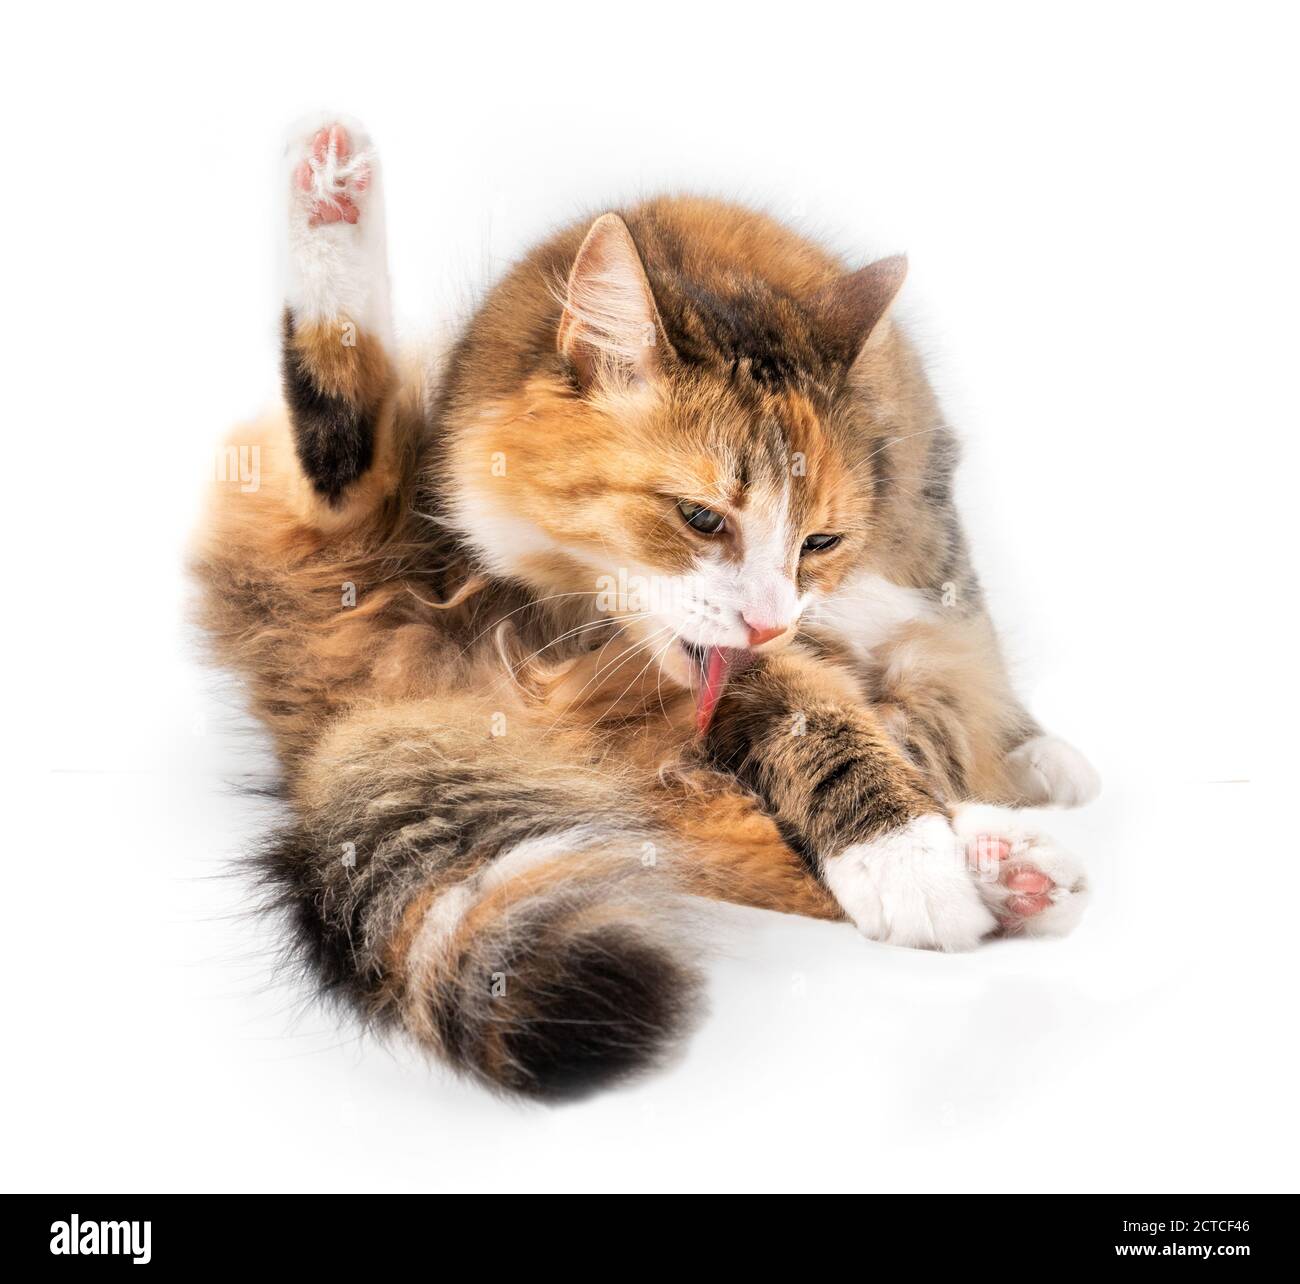 Isolated cat licking itself in sitting position with tongue out. Front view of cat grooming a paw with one hind leg up. 1 year old orange/white female Stock Photo